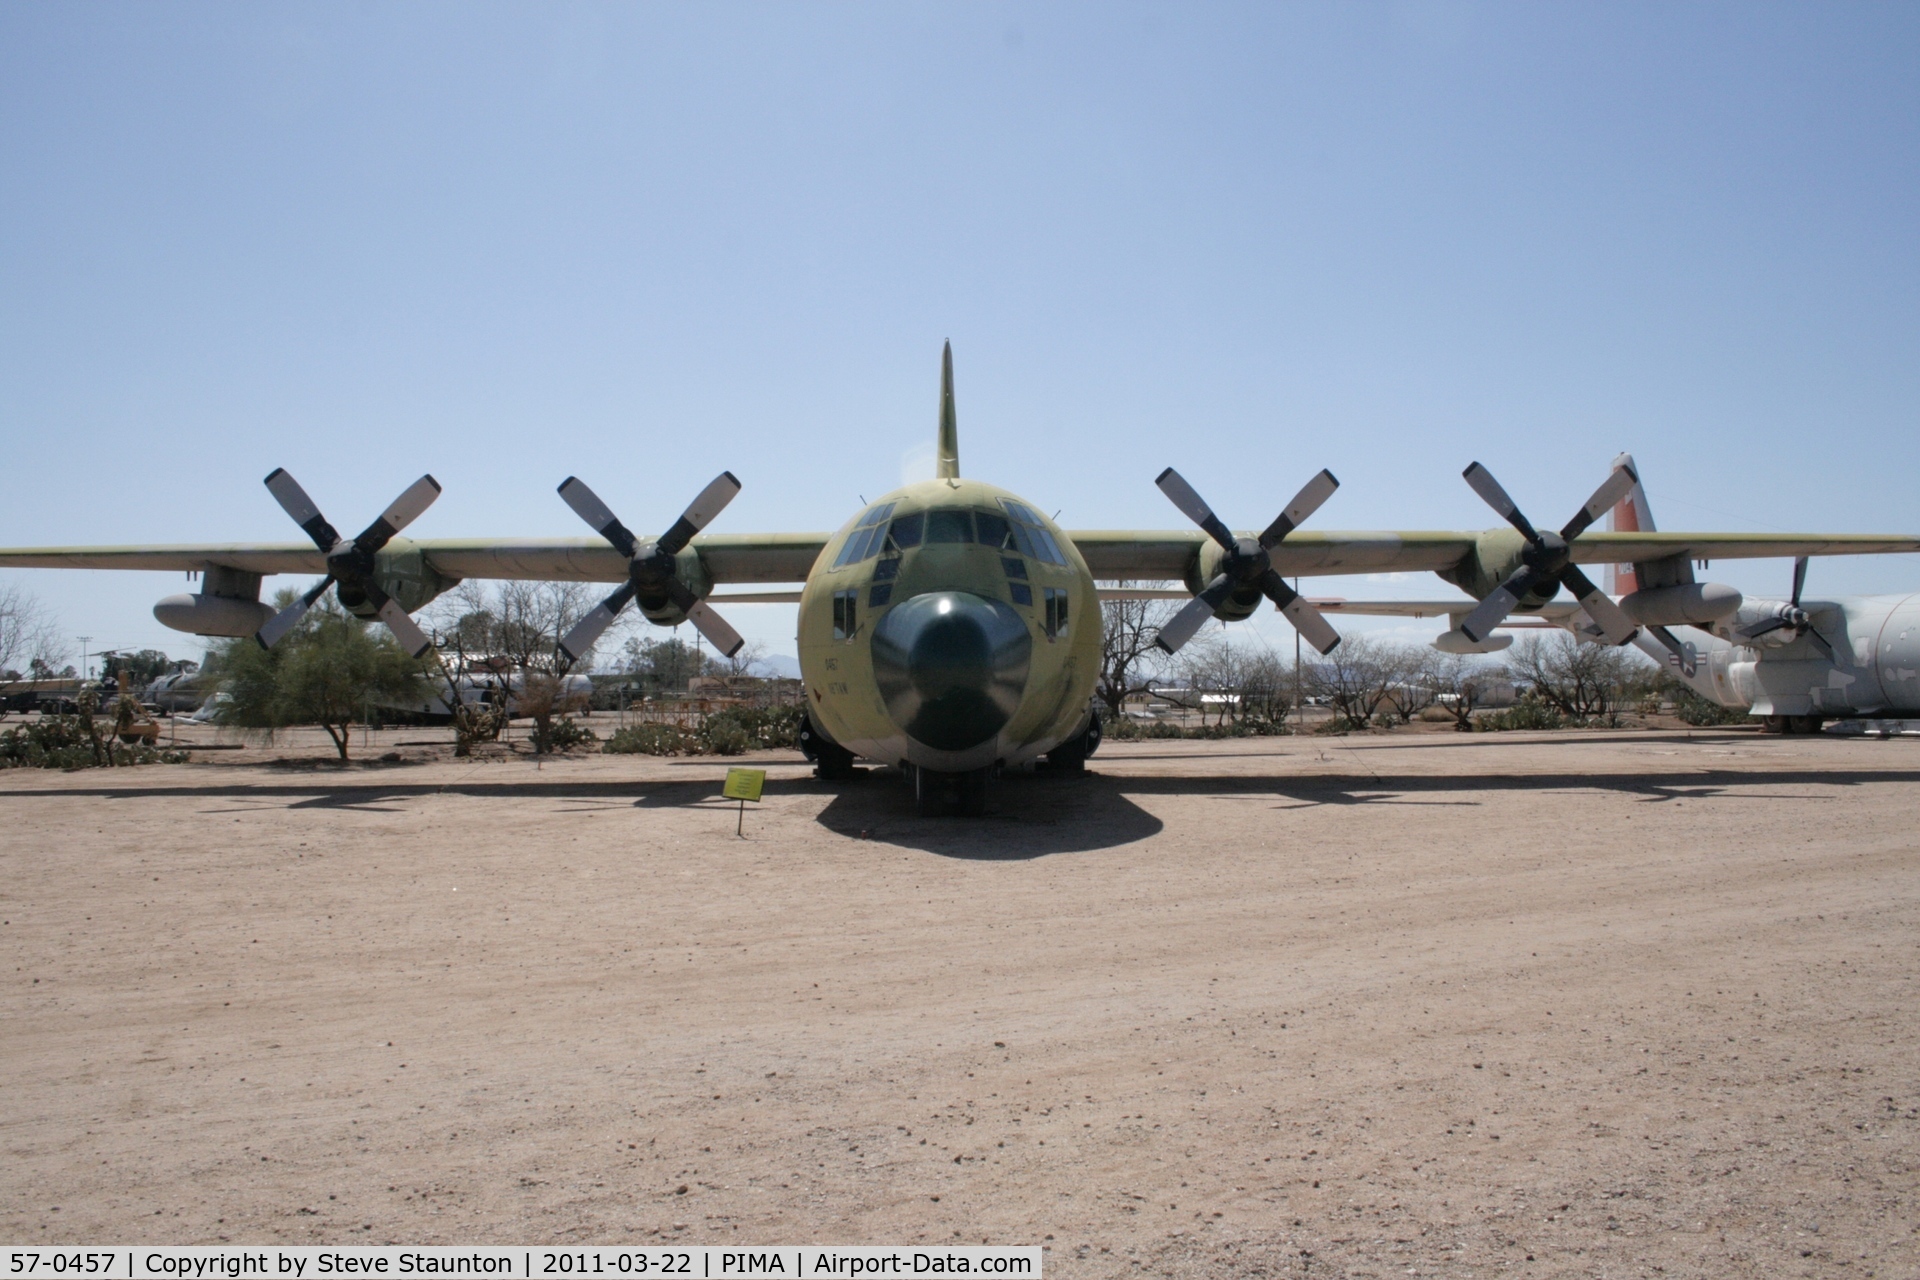 57-0457, 1957 Lockheed C-130A Hercules C/N 182-3164, Taken at Pima Air and Space Museum, in March 2011 whilst on an Aeroprint Aviation tour